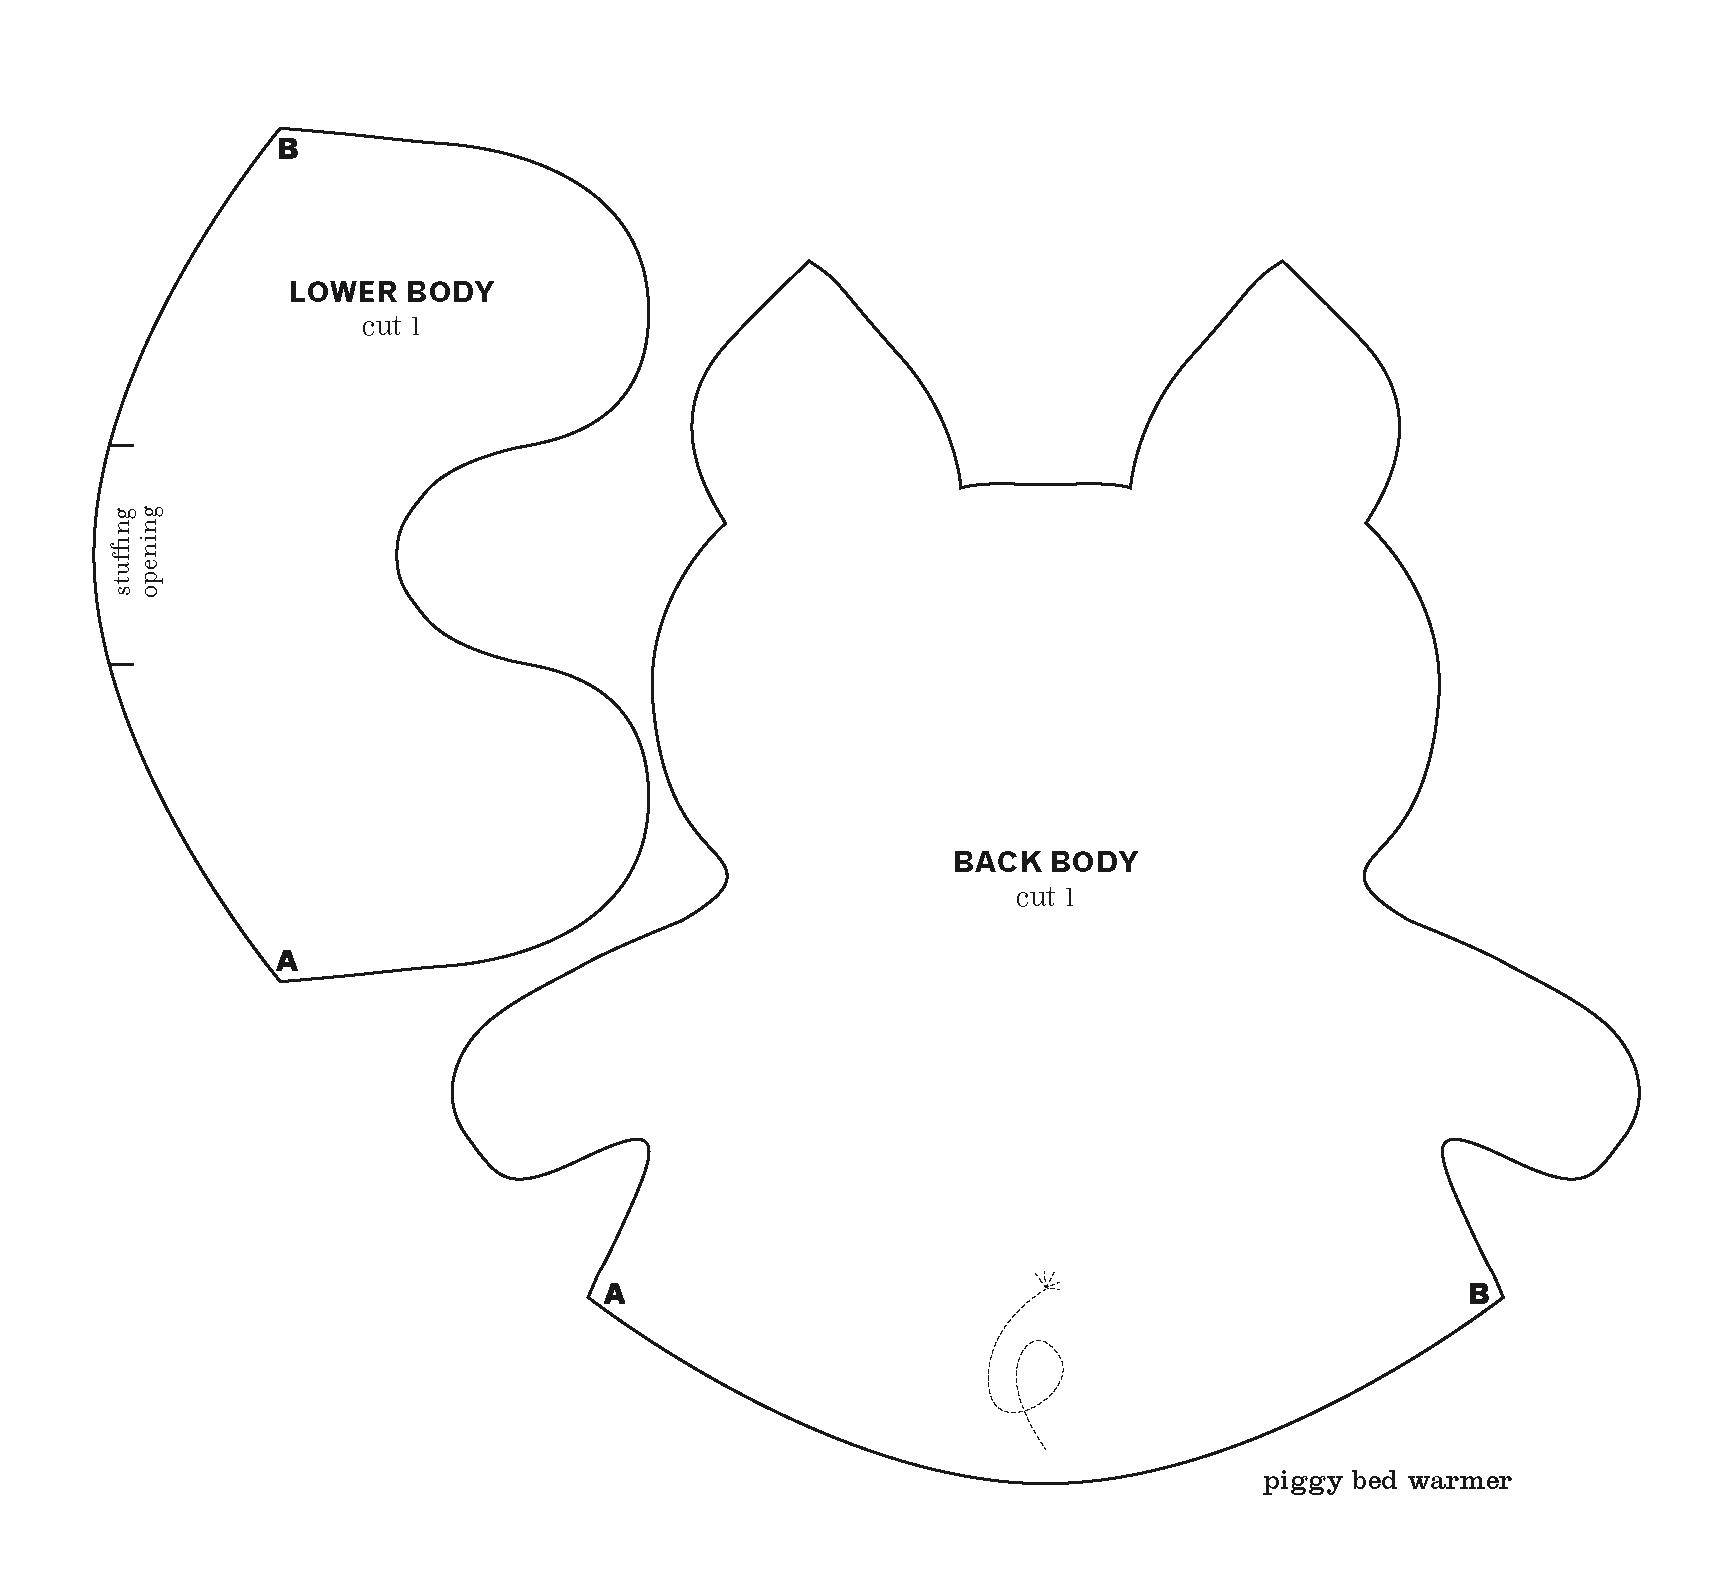 Coloring Cut the pig. Category The outline of a pig to cut. Tags:  Pig, Piglet.